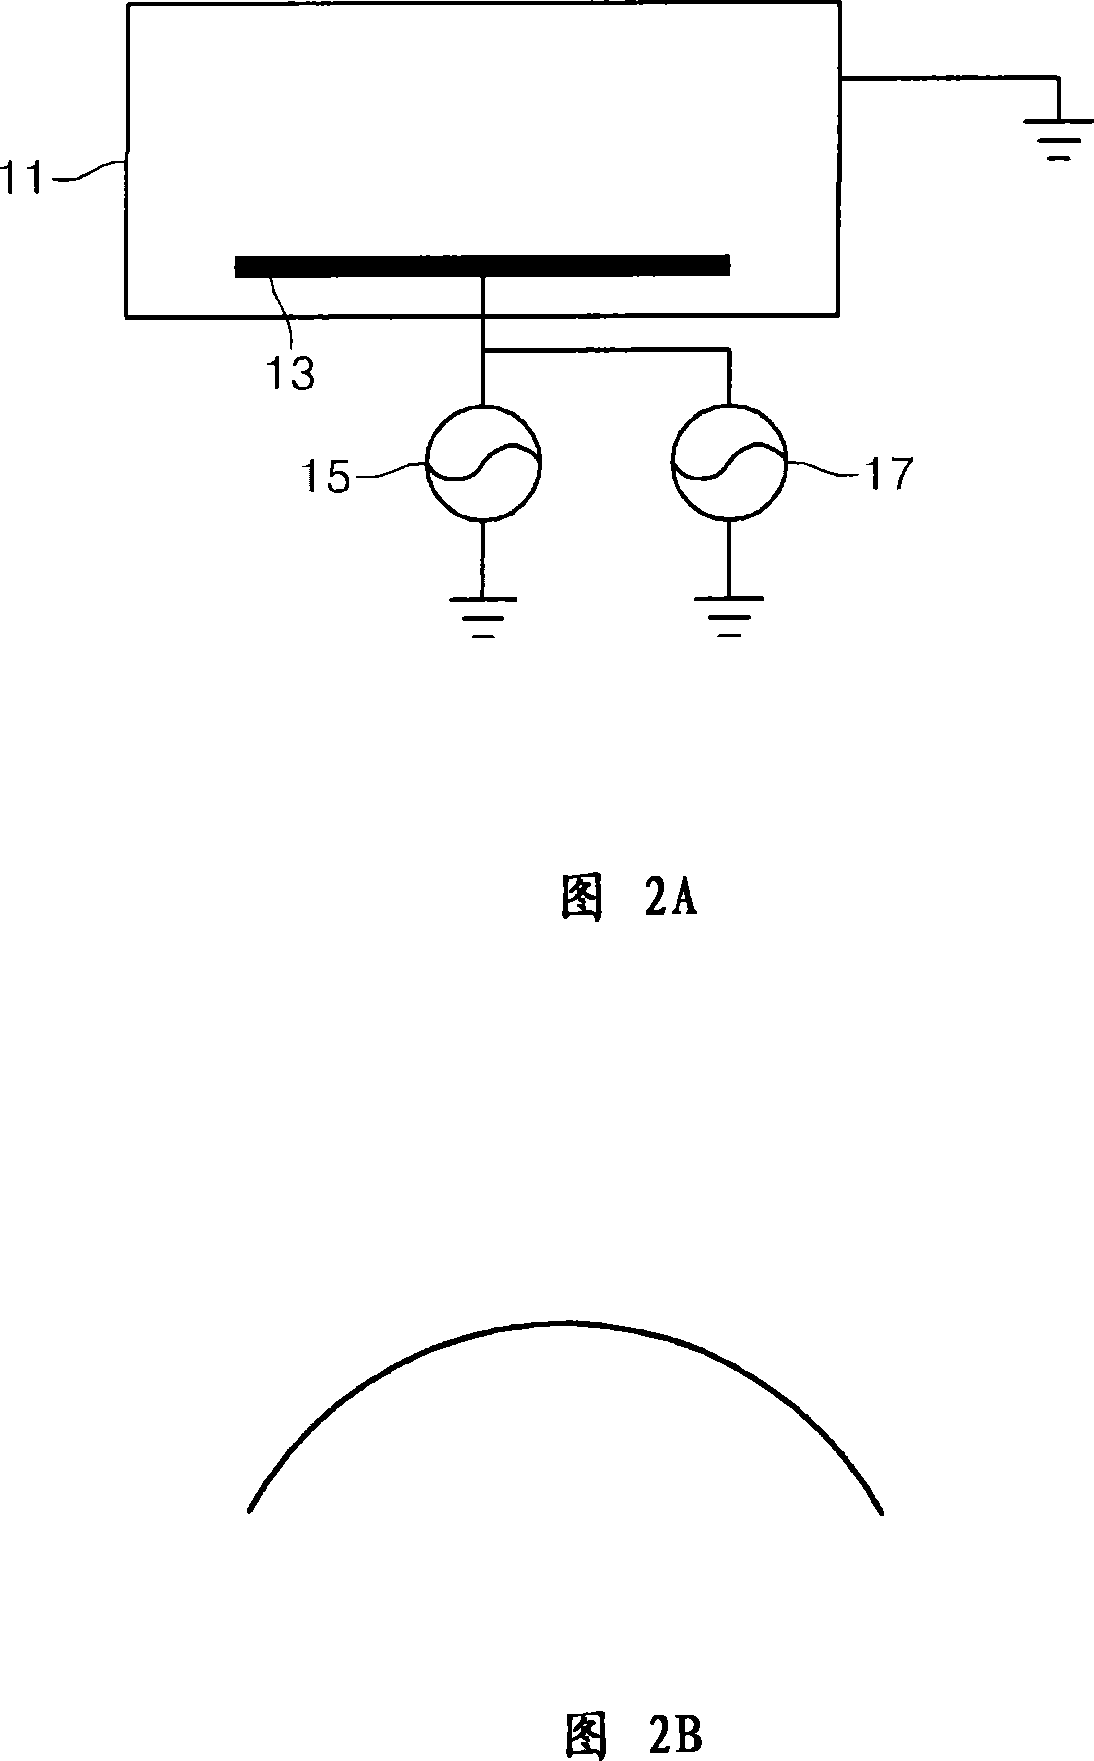 Semiconductor substrate processing apparatus, method, and medium